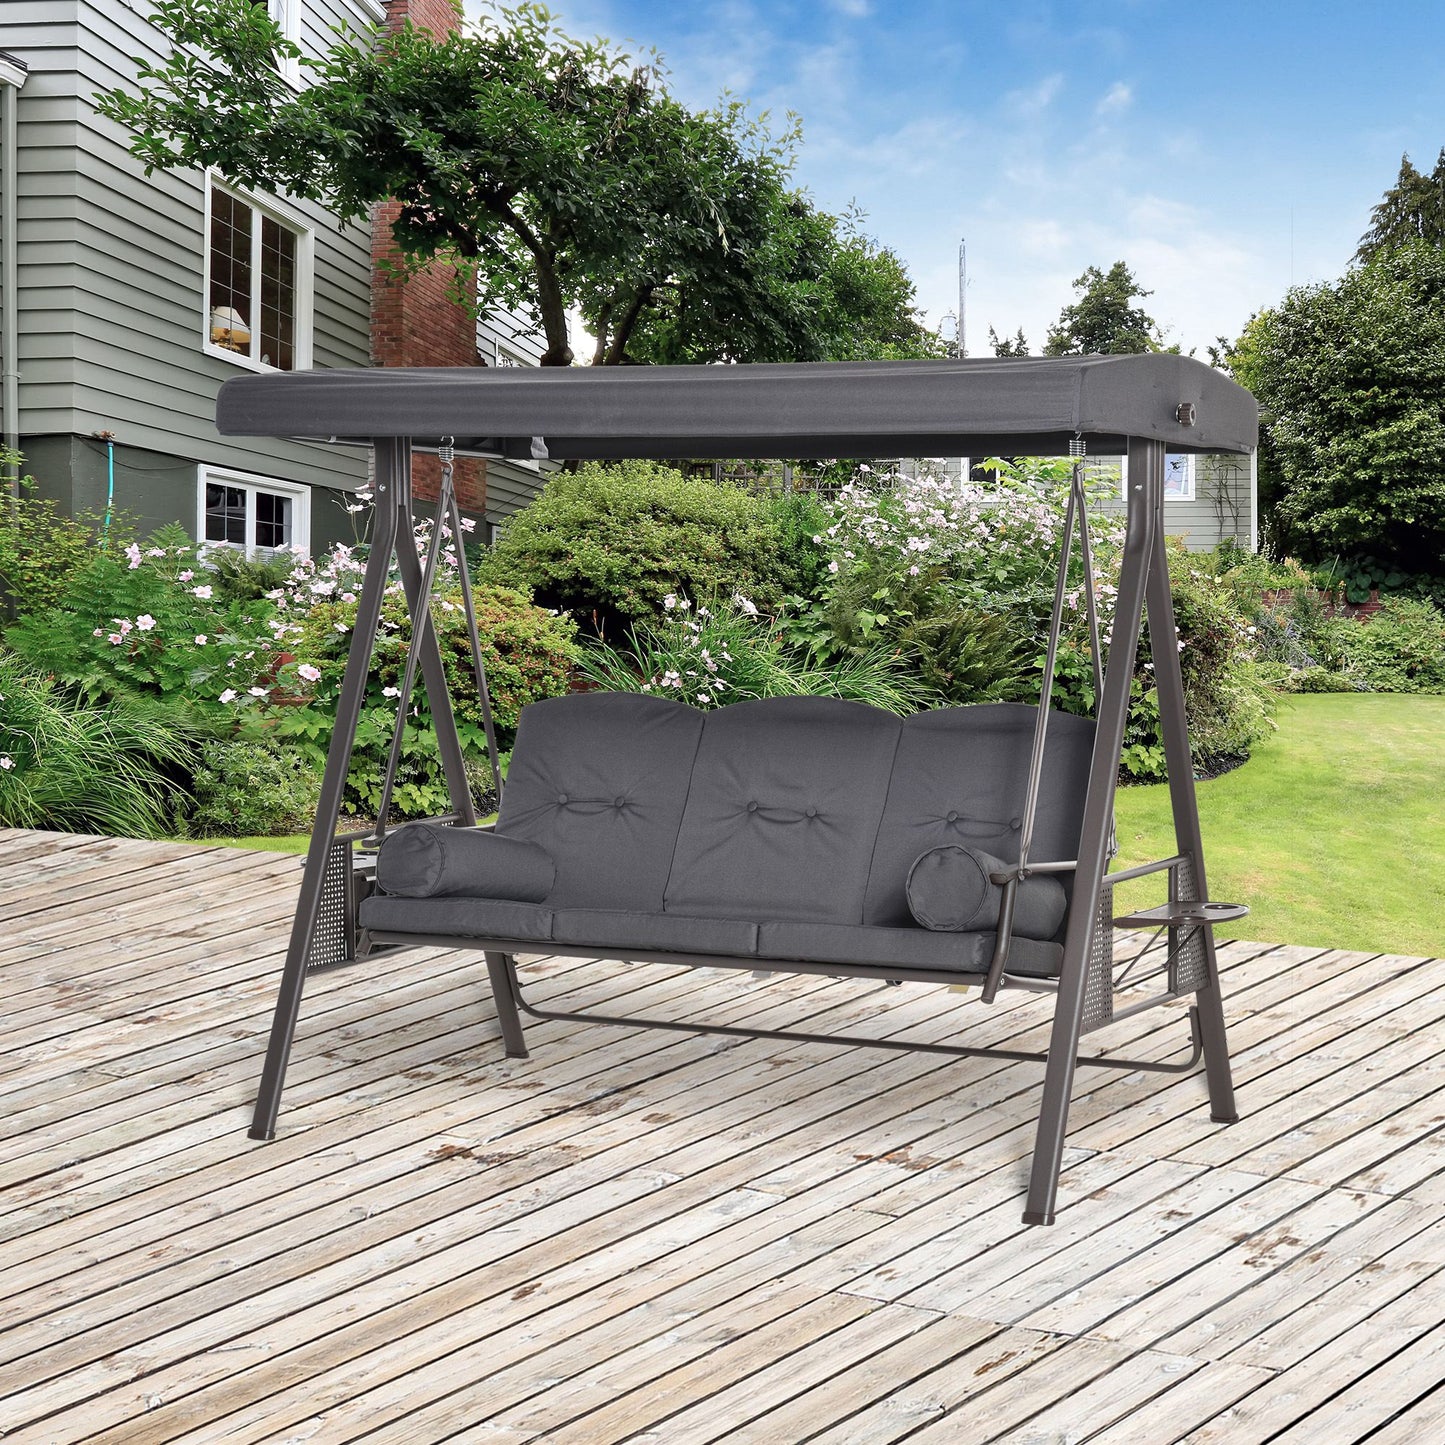 Outsunny 3 Seat Garden Swing Chair Steel Swing Bench w/ Cushions Cup Trays